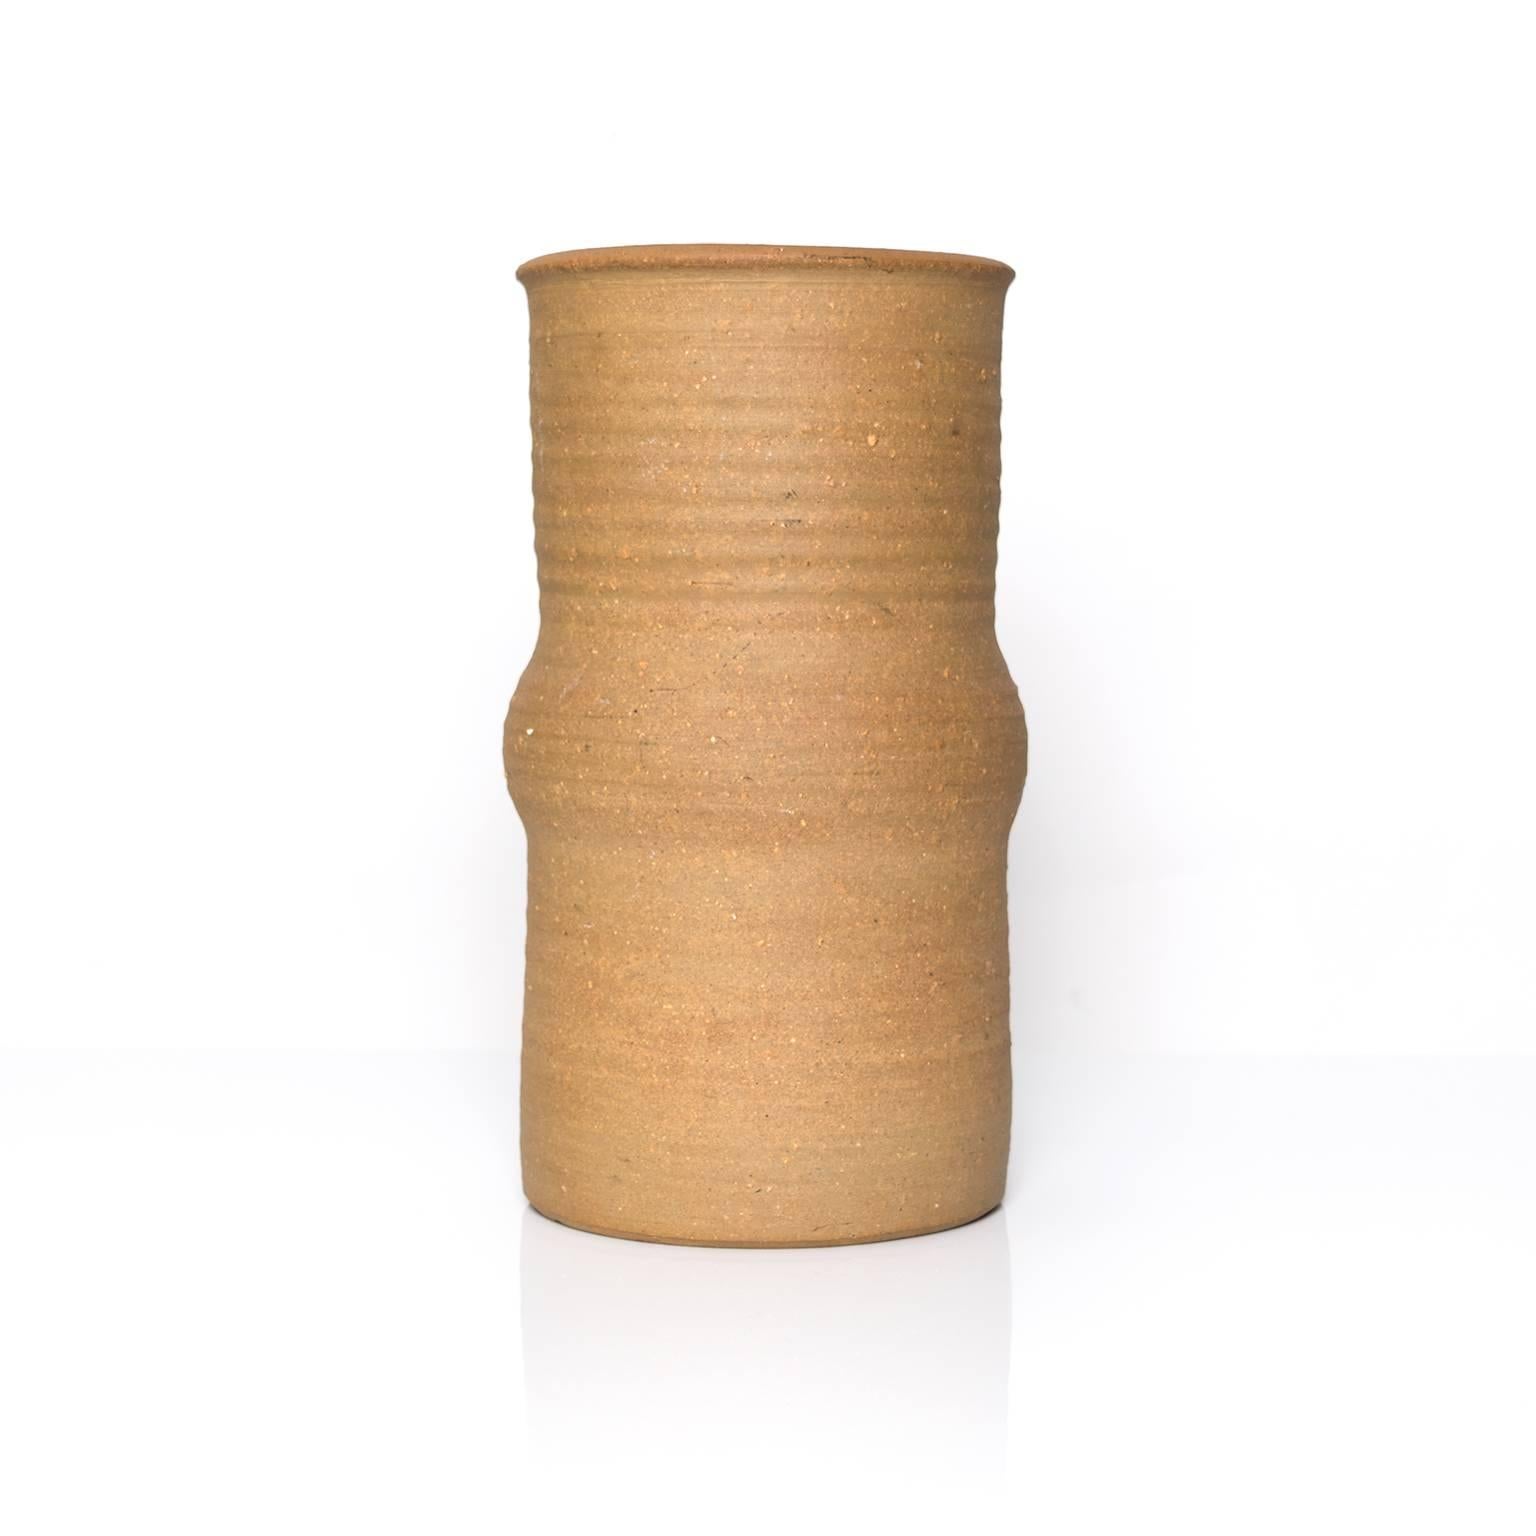 A tall Scandinavian Modern ceramic studio vase by designer Signe Persson-Melin. The exterior is unglazed in a clay often referred to as 